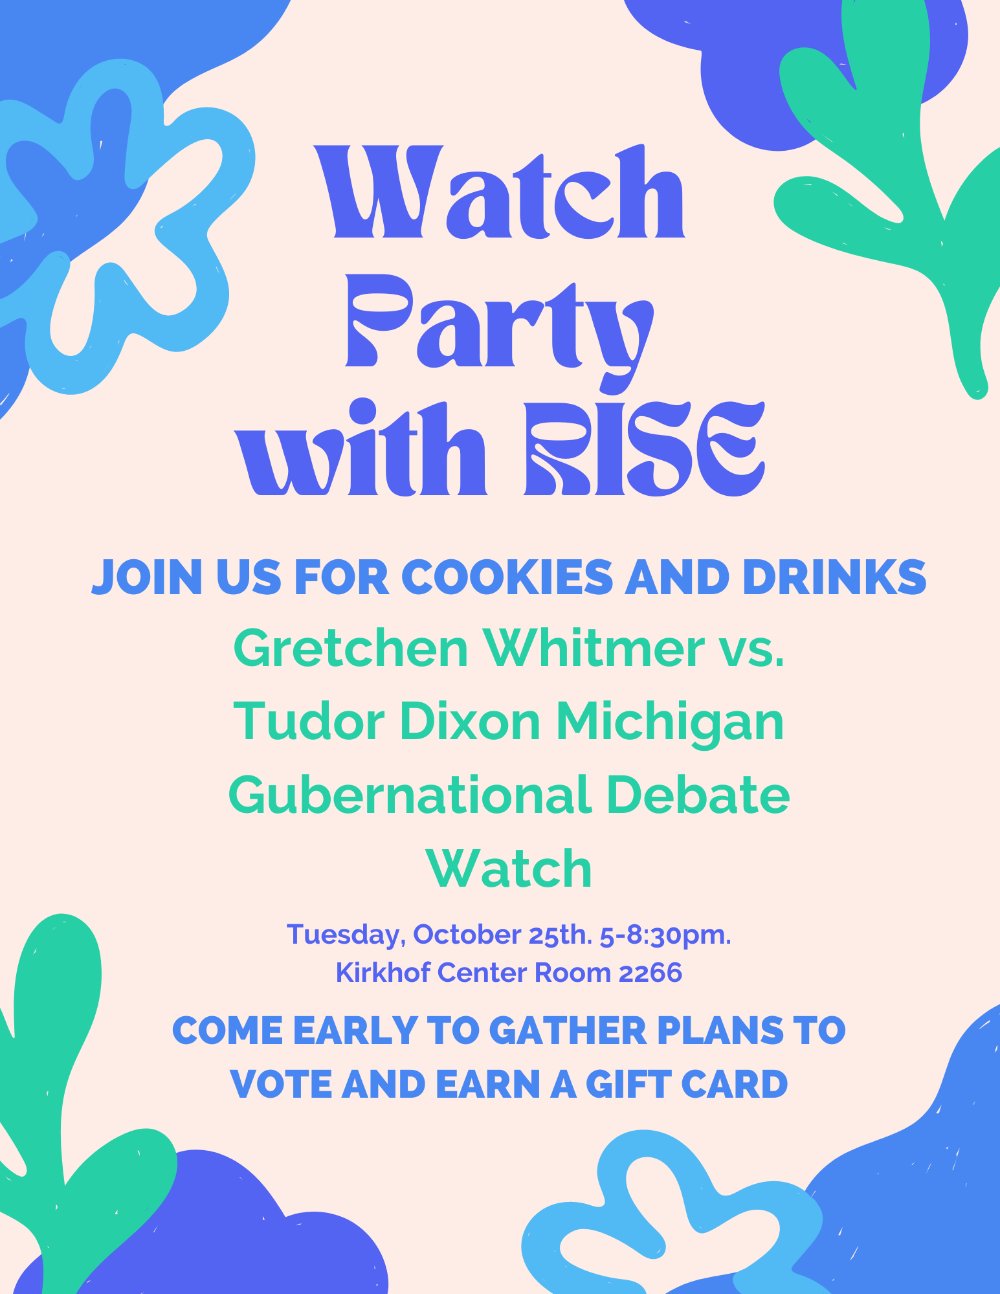 RISE watch party event flyer